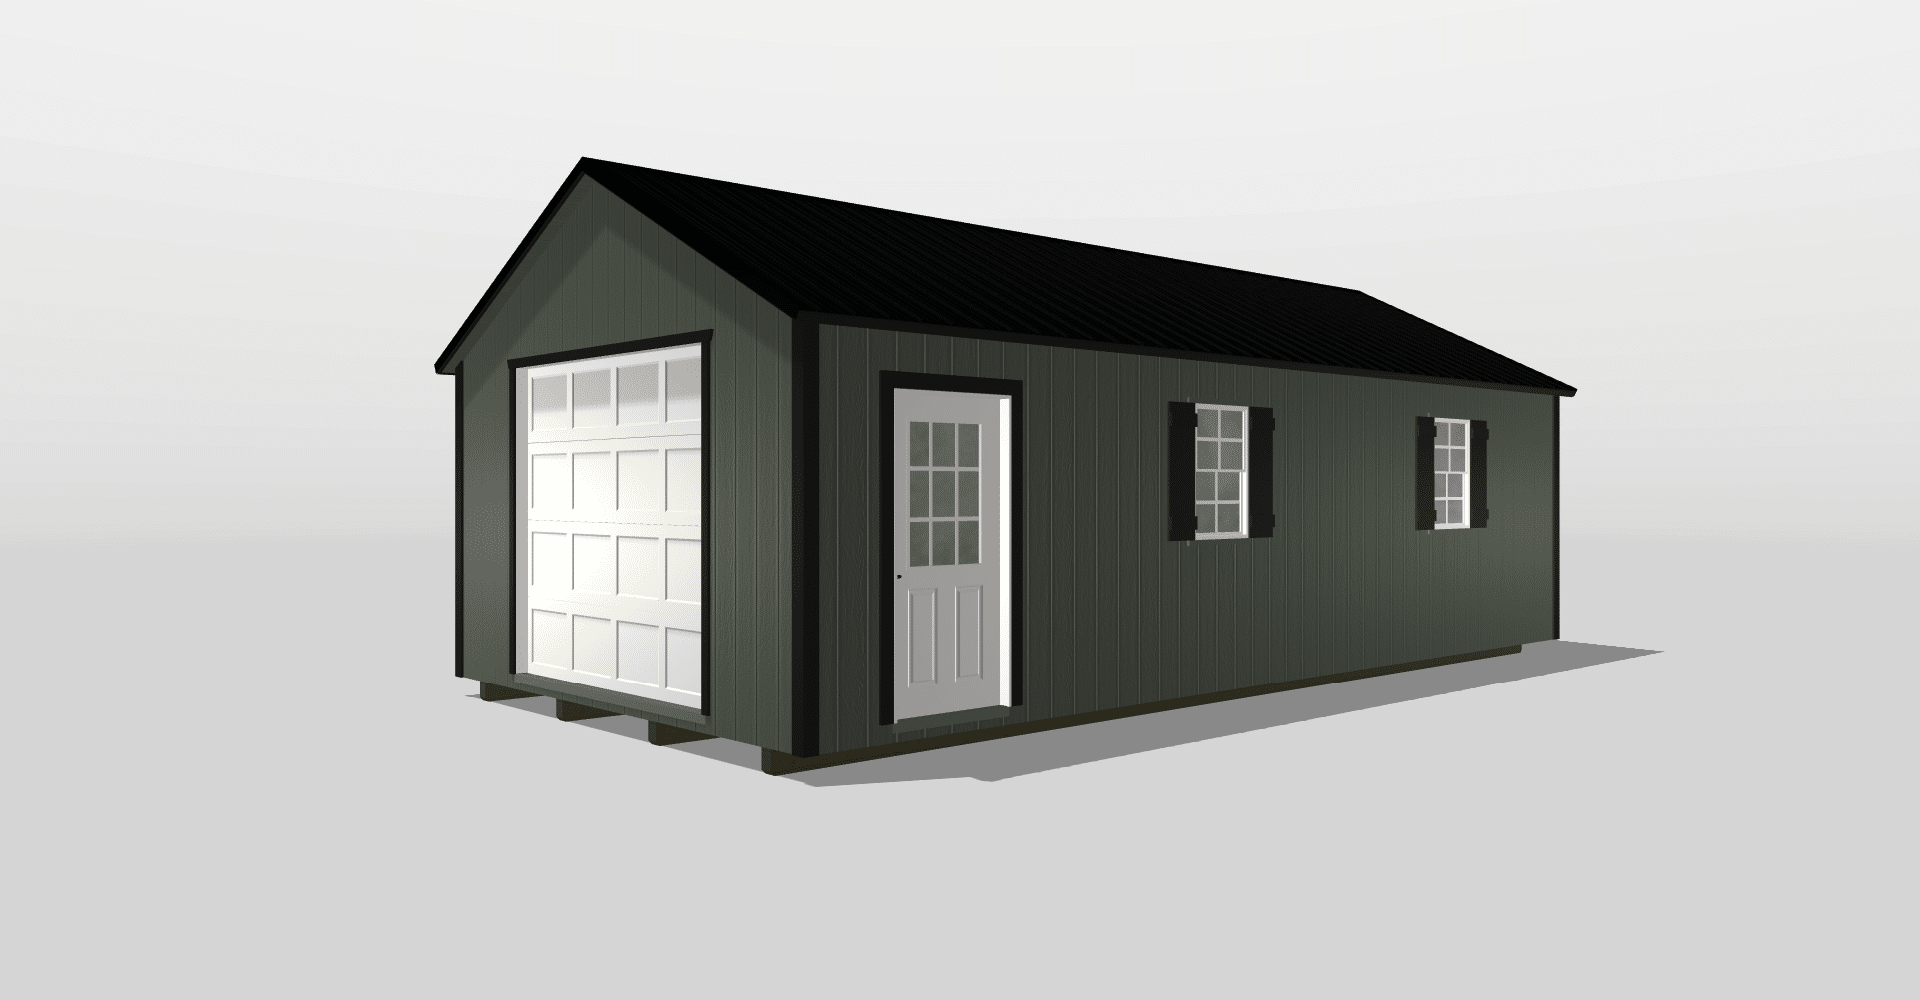 A 14x28 car shed design available in Georgia